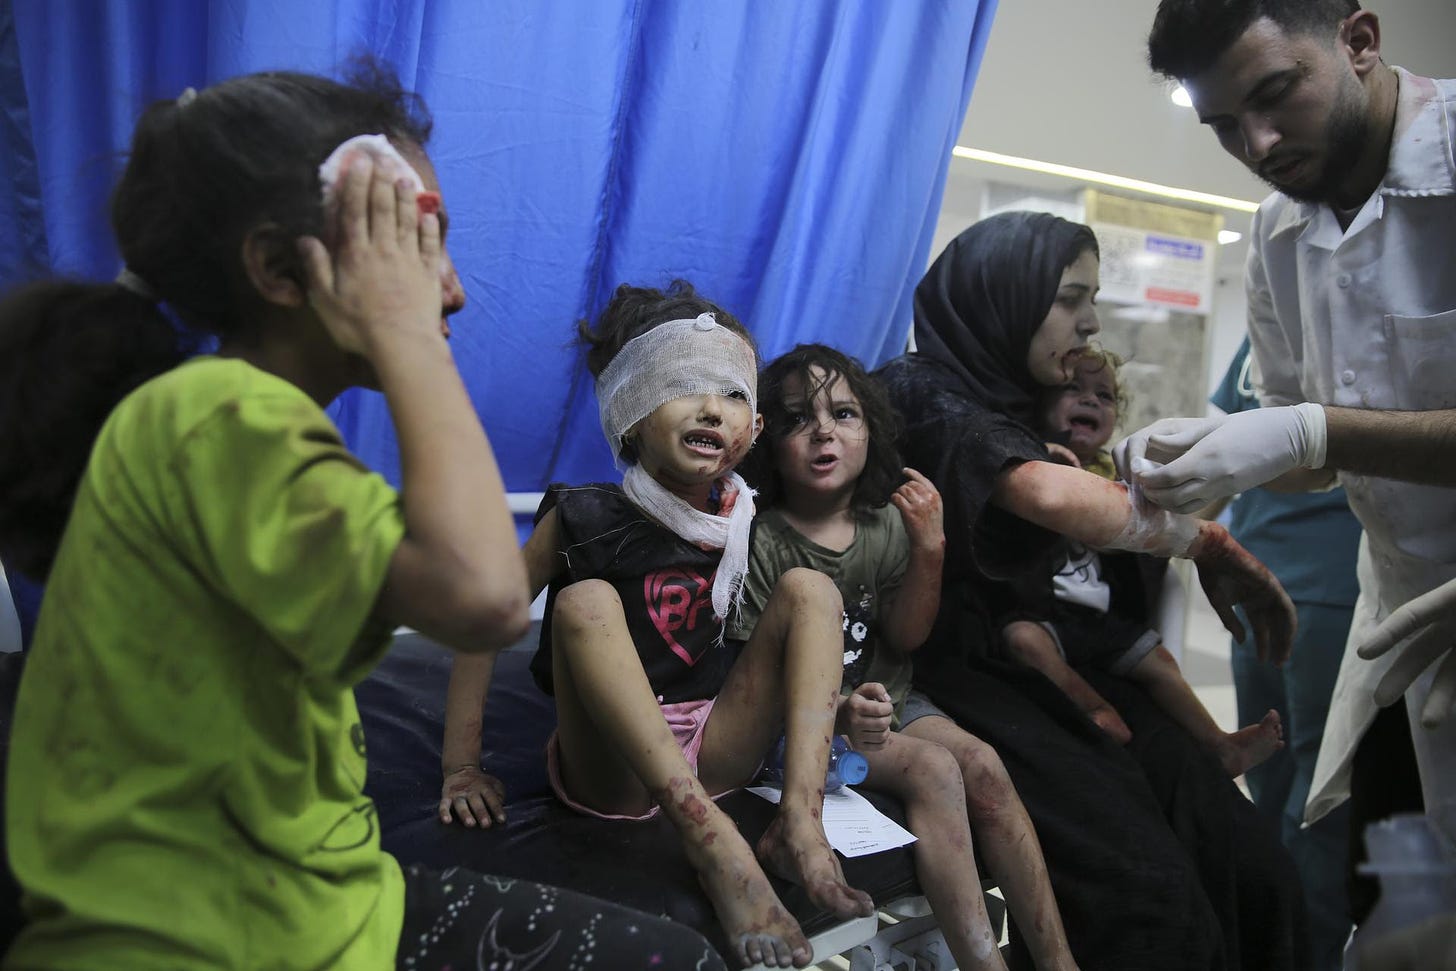 Palestinian children wounded in Israeli strikes are brought to Shifa Hospital in Gaza City on Wednesday.